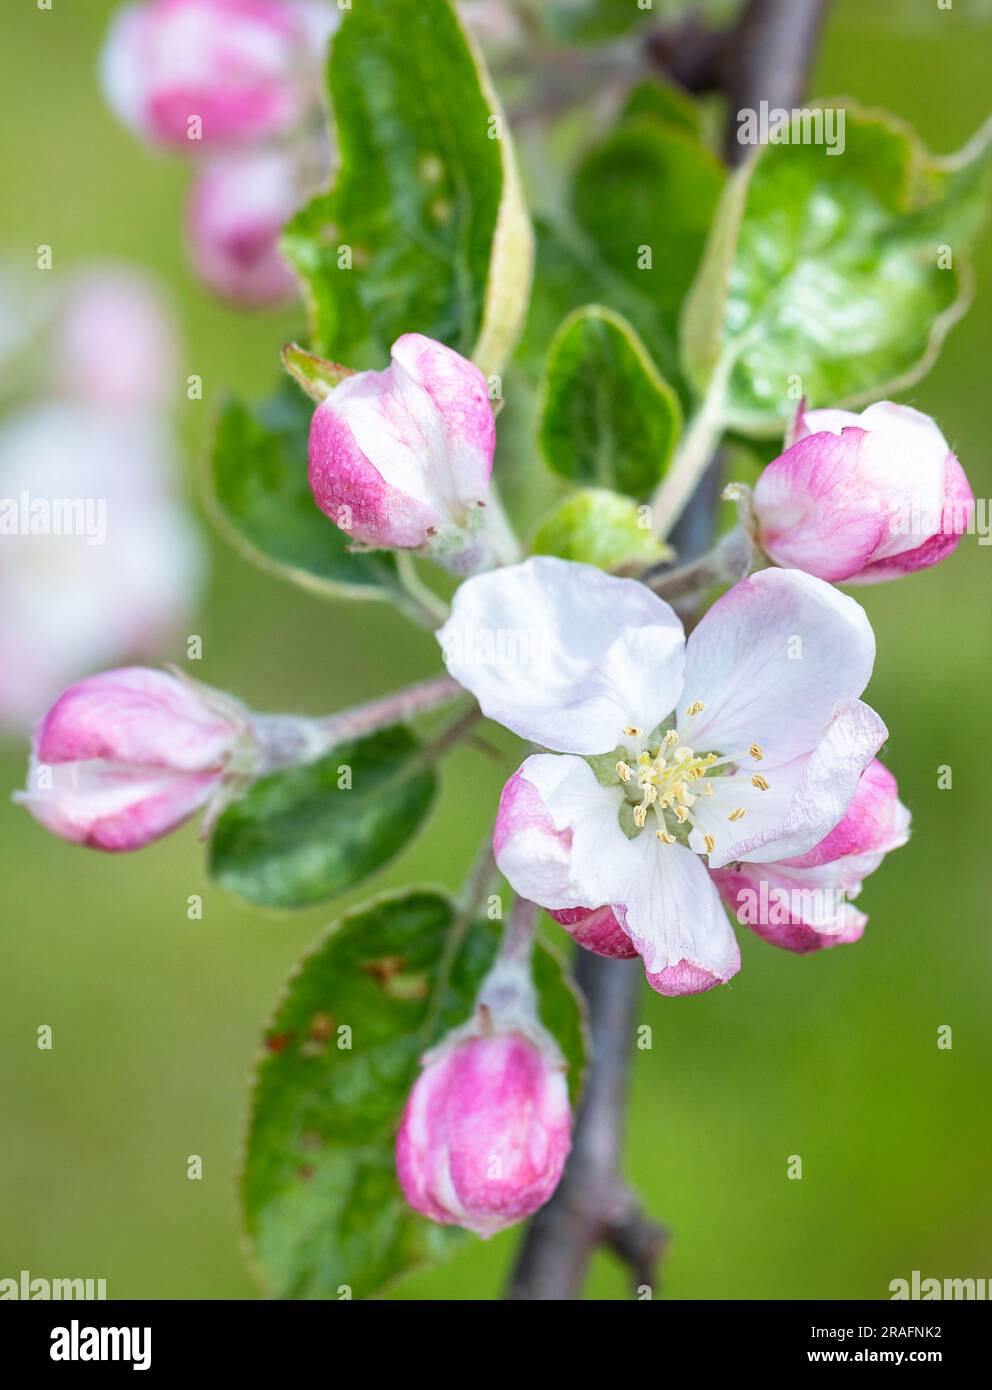 Fresh white and pink flowers of a blooming apple tree with a blurred green background. Blooming apple tree. Vertical image, copy space. Stock Photo